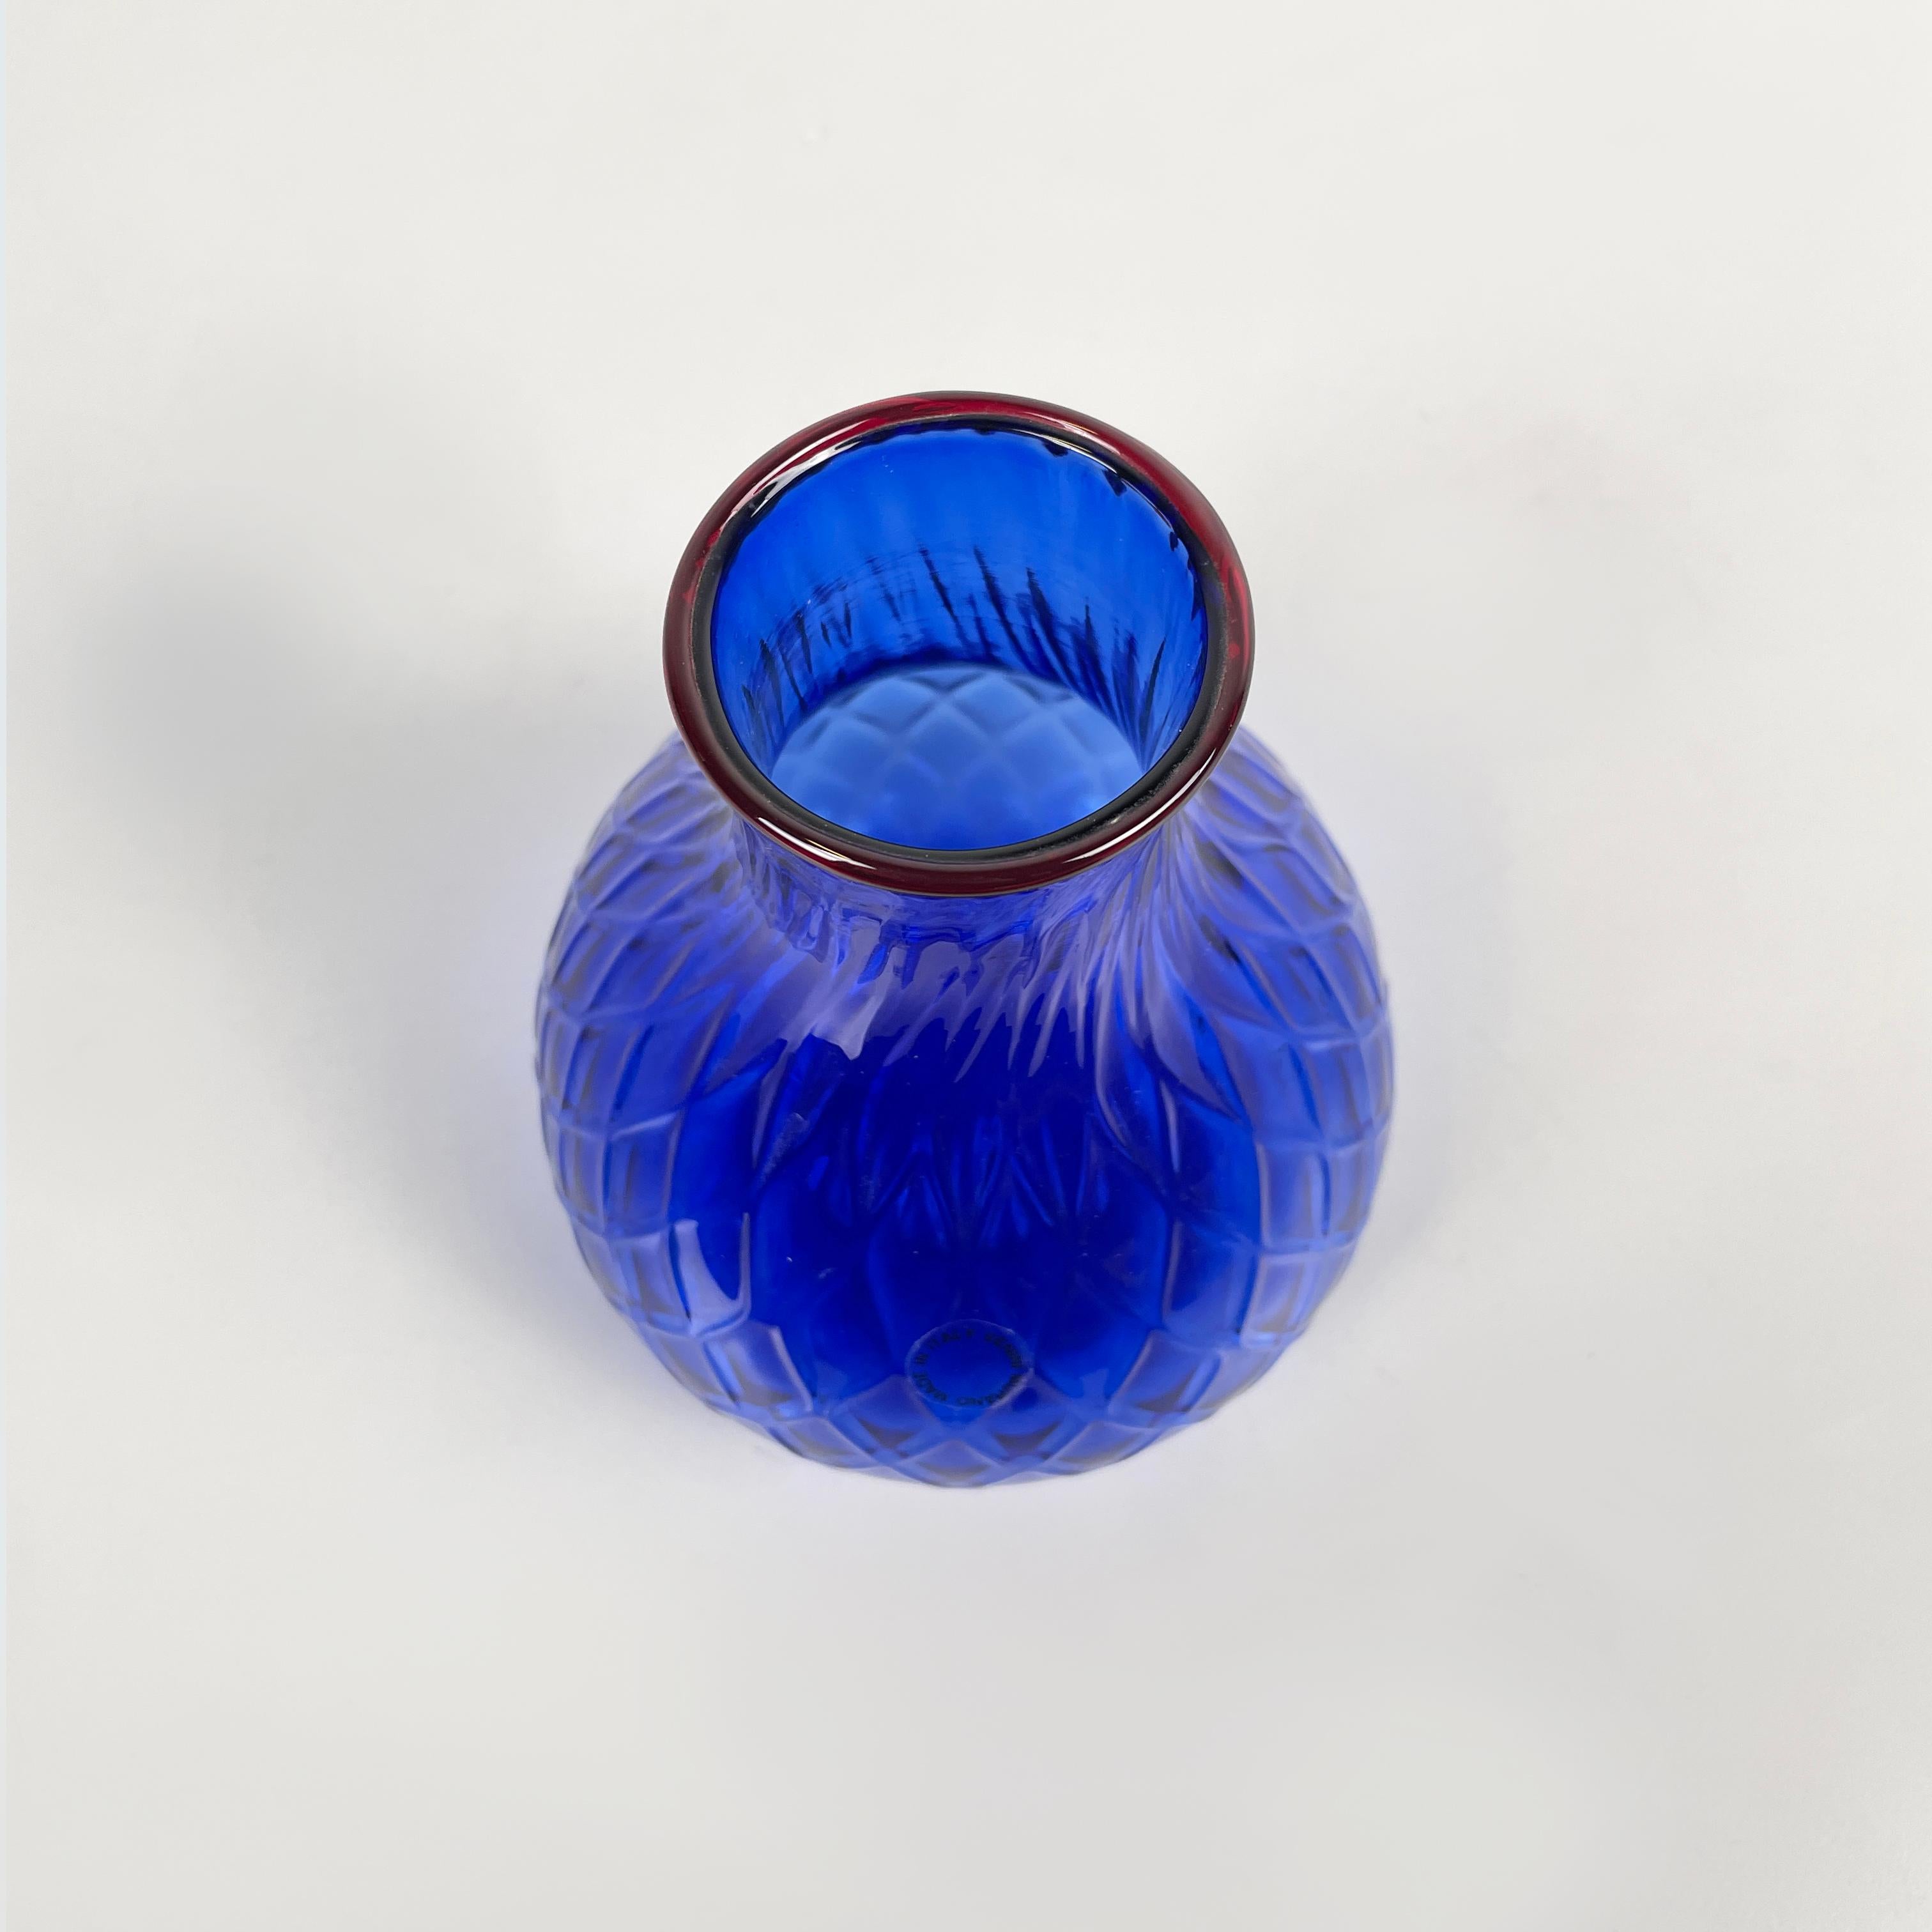 Modern Italian modern Round vase in red and blue Murano glass by Venini 1990s For Sale